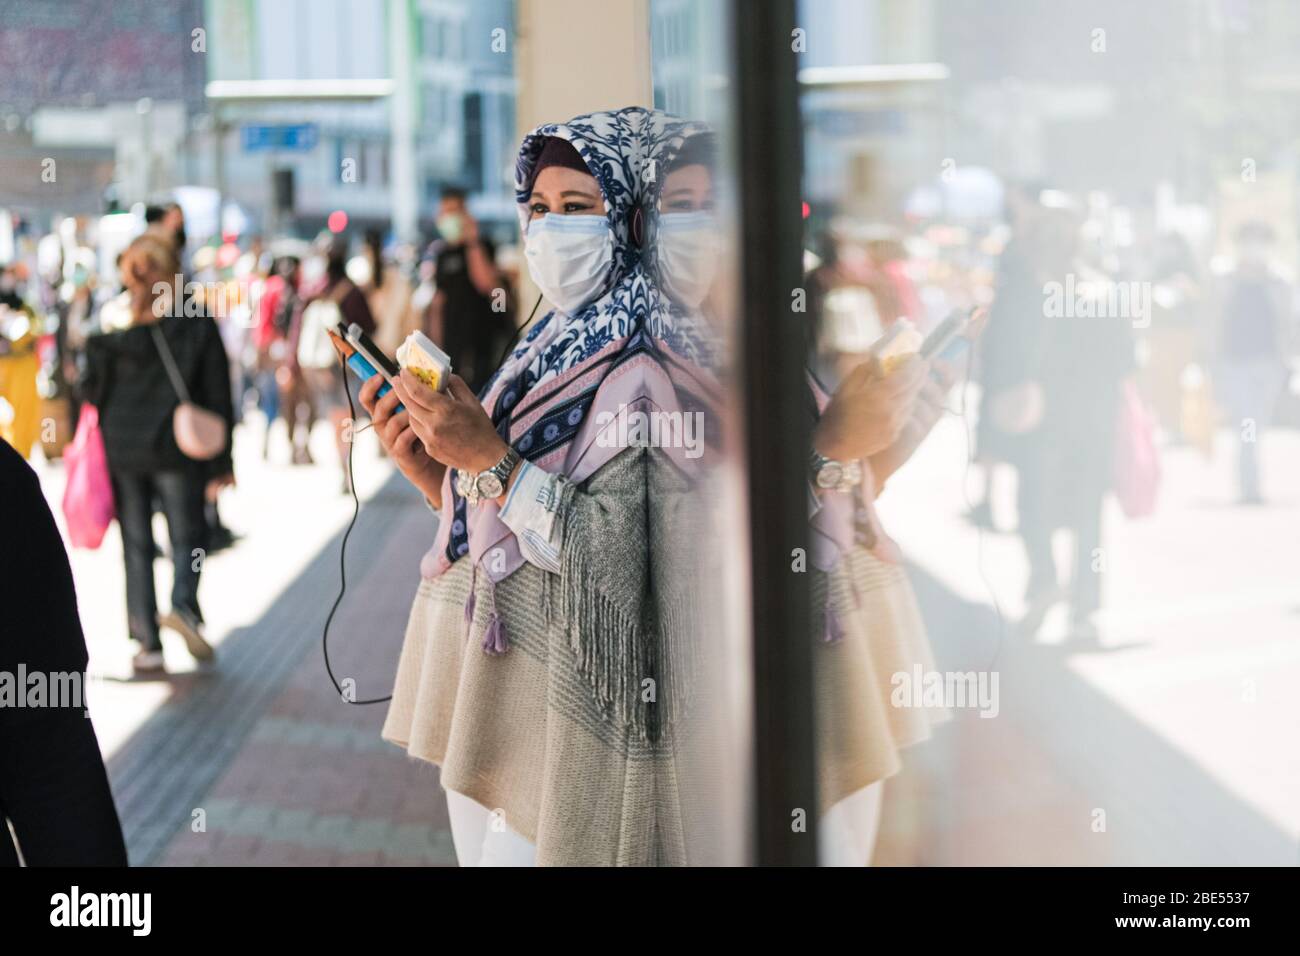 Hong Kong, China. 12th Apr, 2020. People wear surgical face mask on the street. Corona Virus (Covid19) cases in Hong Kong have reached over 1,000 on Saturday as authorities urged the public to stay at home during the long Easter weekend. Credit: Keith Tsuji/ZUMA Wire/Alamy Live News Stock Photo